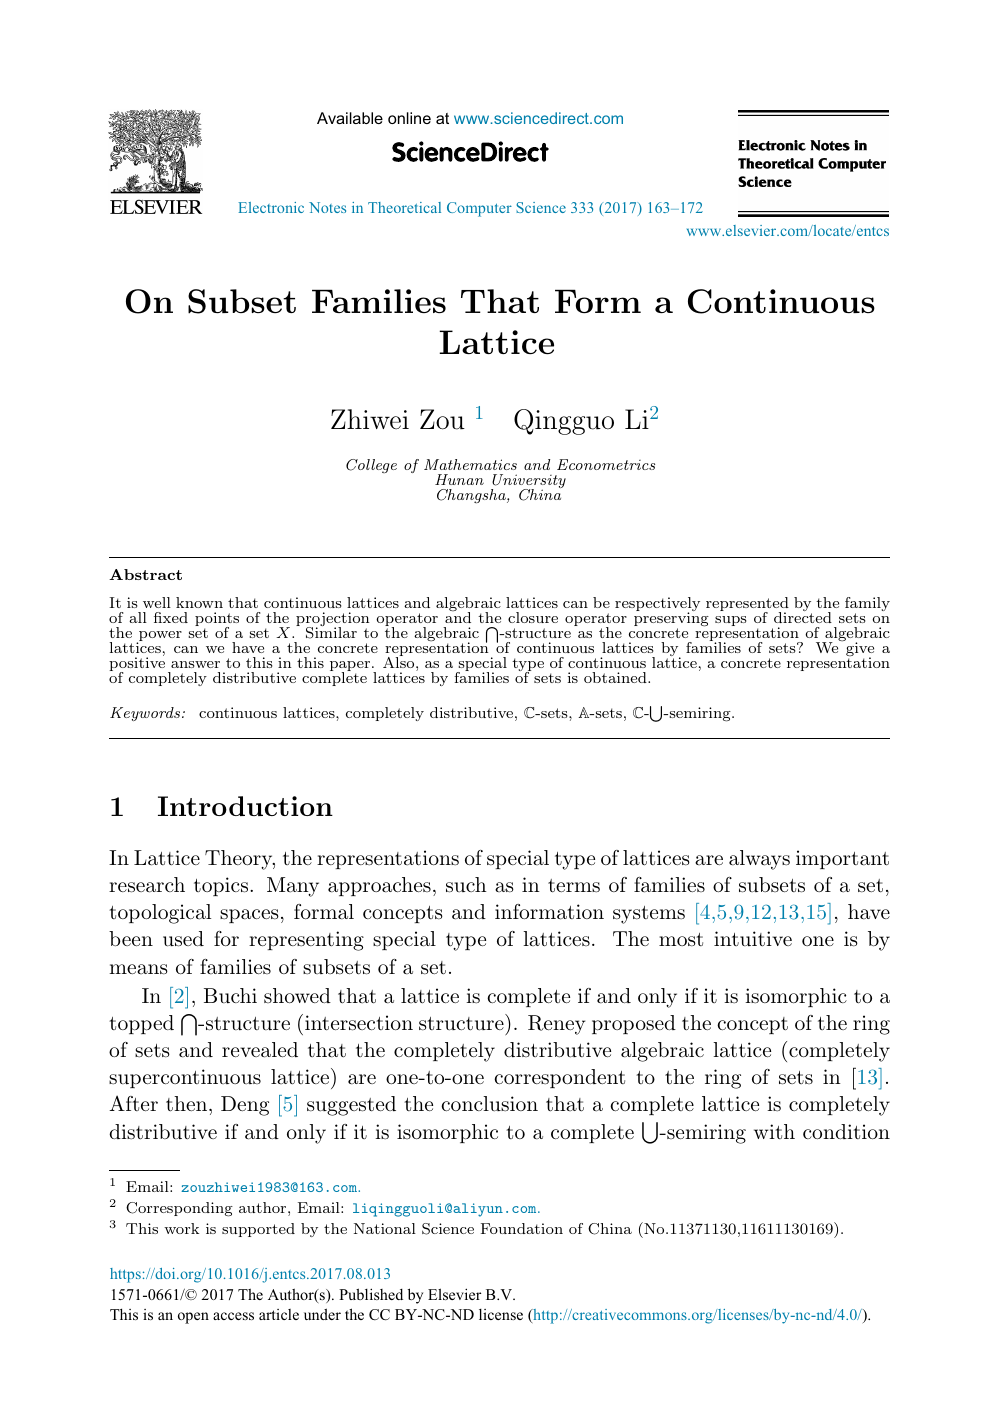 On Subset Families That Form A Continuous Lattice Topic Of Research Paper In Mathematics Download Scholarly Article Pdf And Read For Free On Cyberleninka Open Science Hub